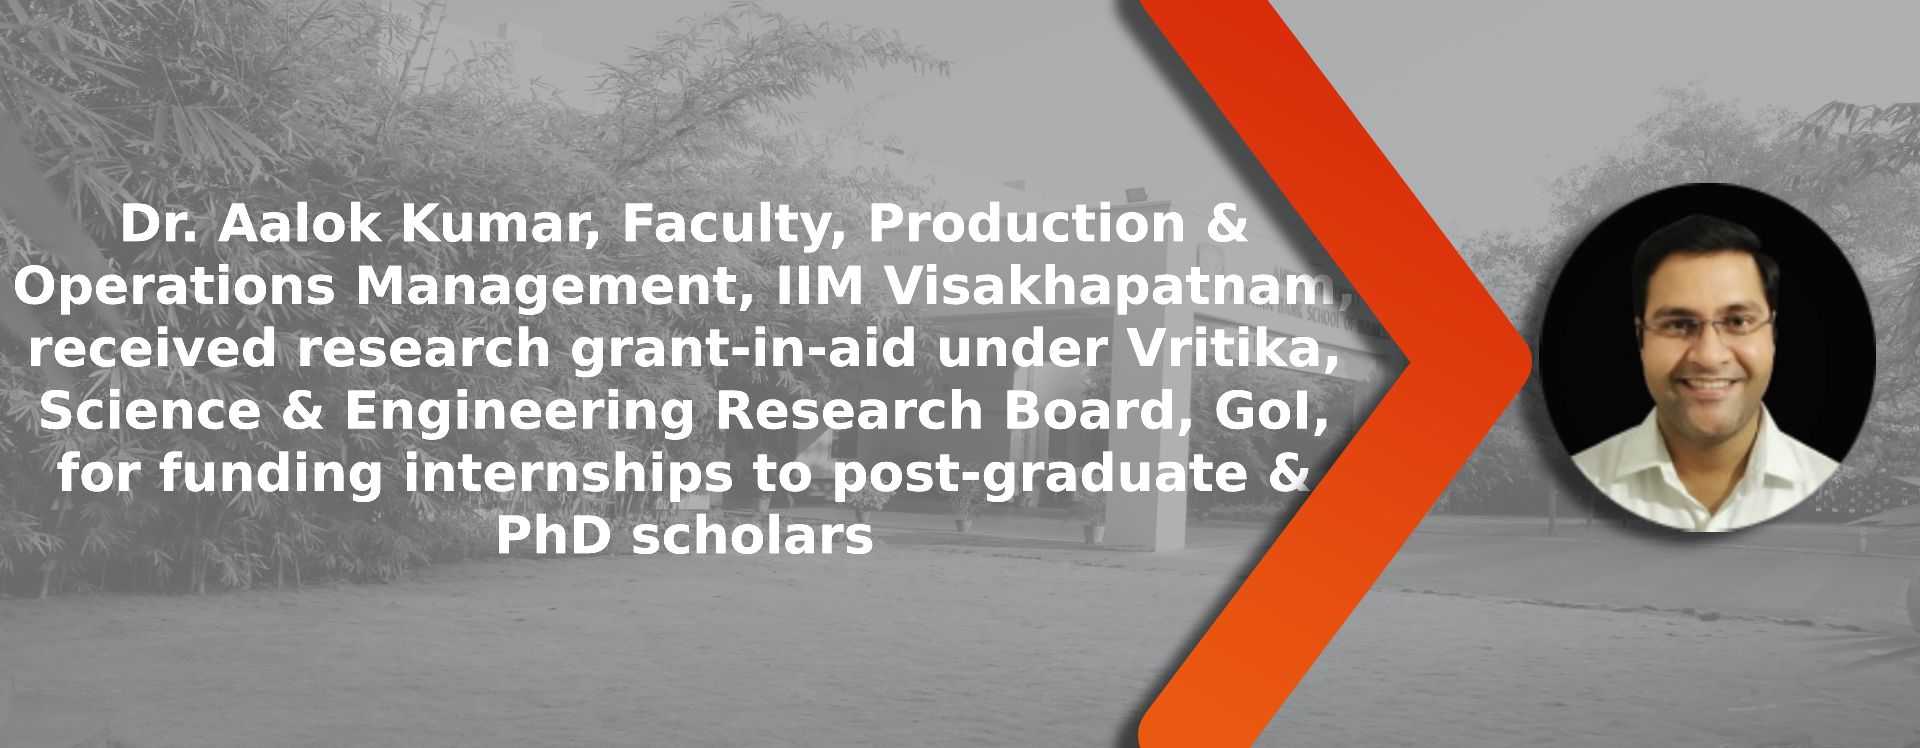 Research grant-in-aid under Vritika, Science & Engineering Research Board, GoI